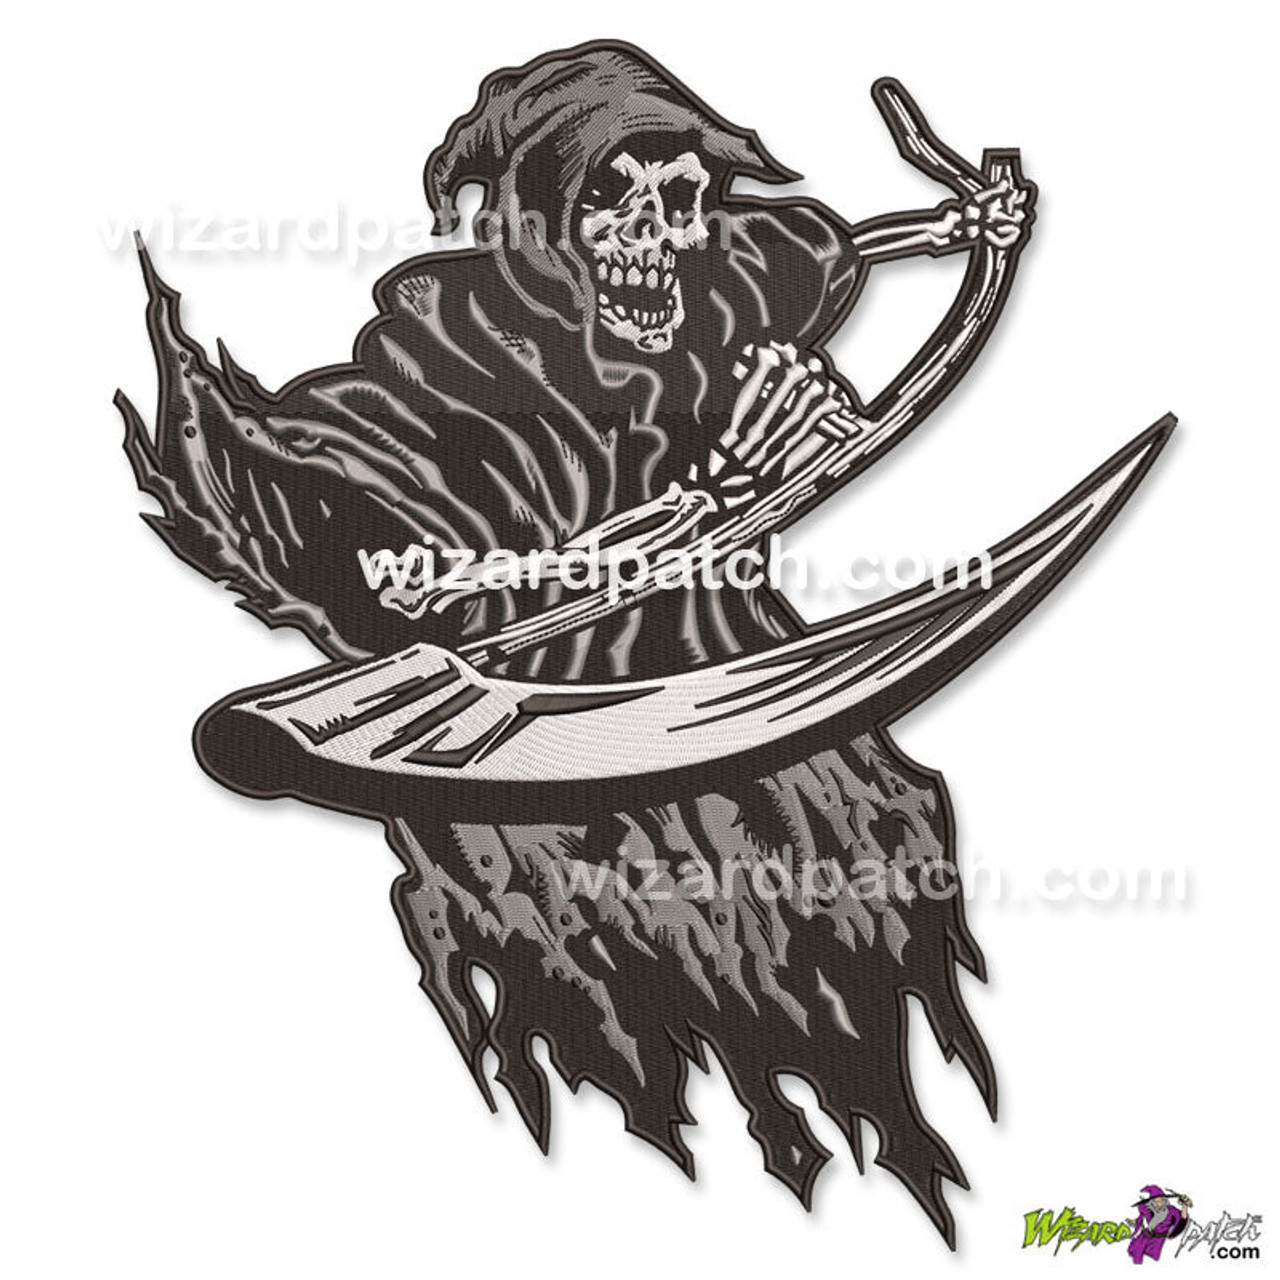 Back Patches for Jackets, Biker Scull Patches, Large Patches White